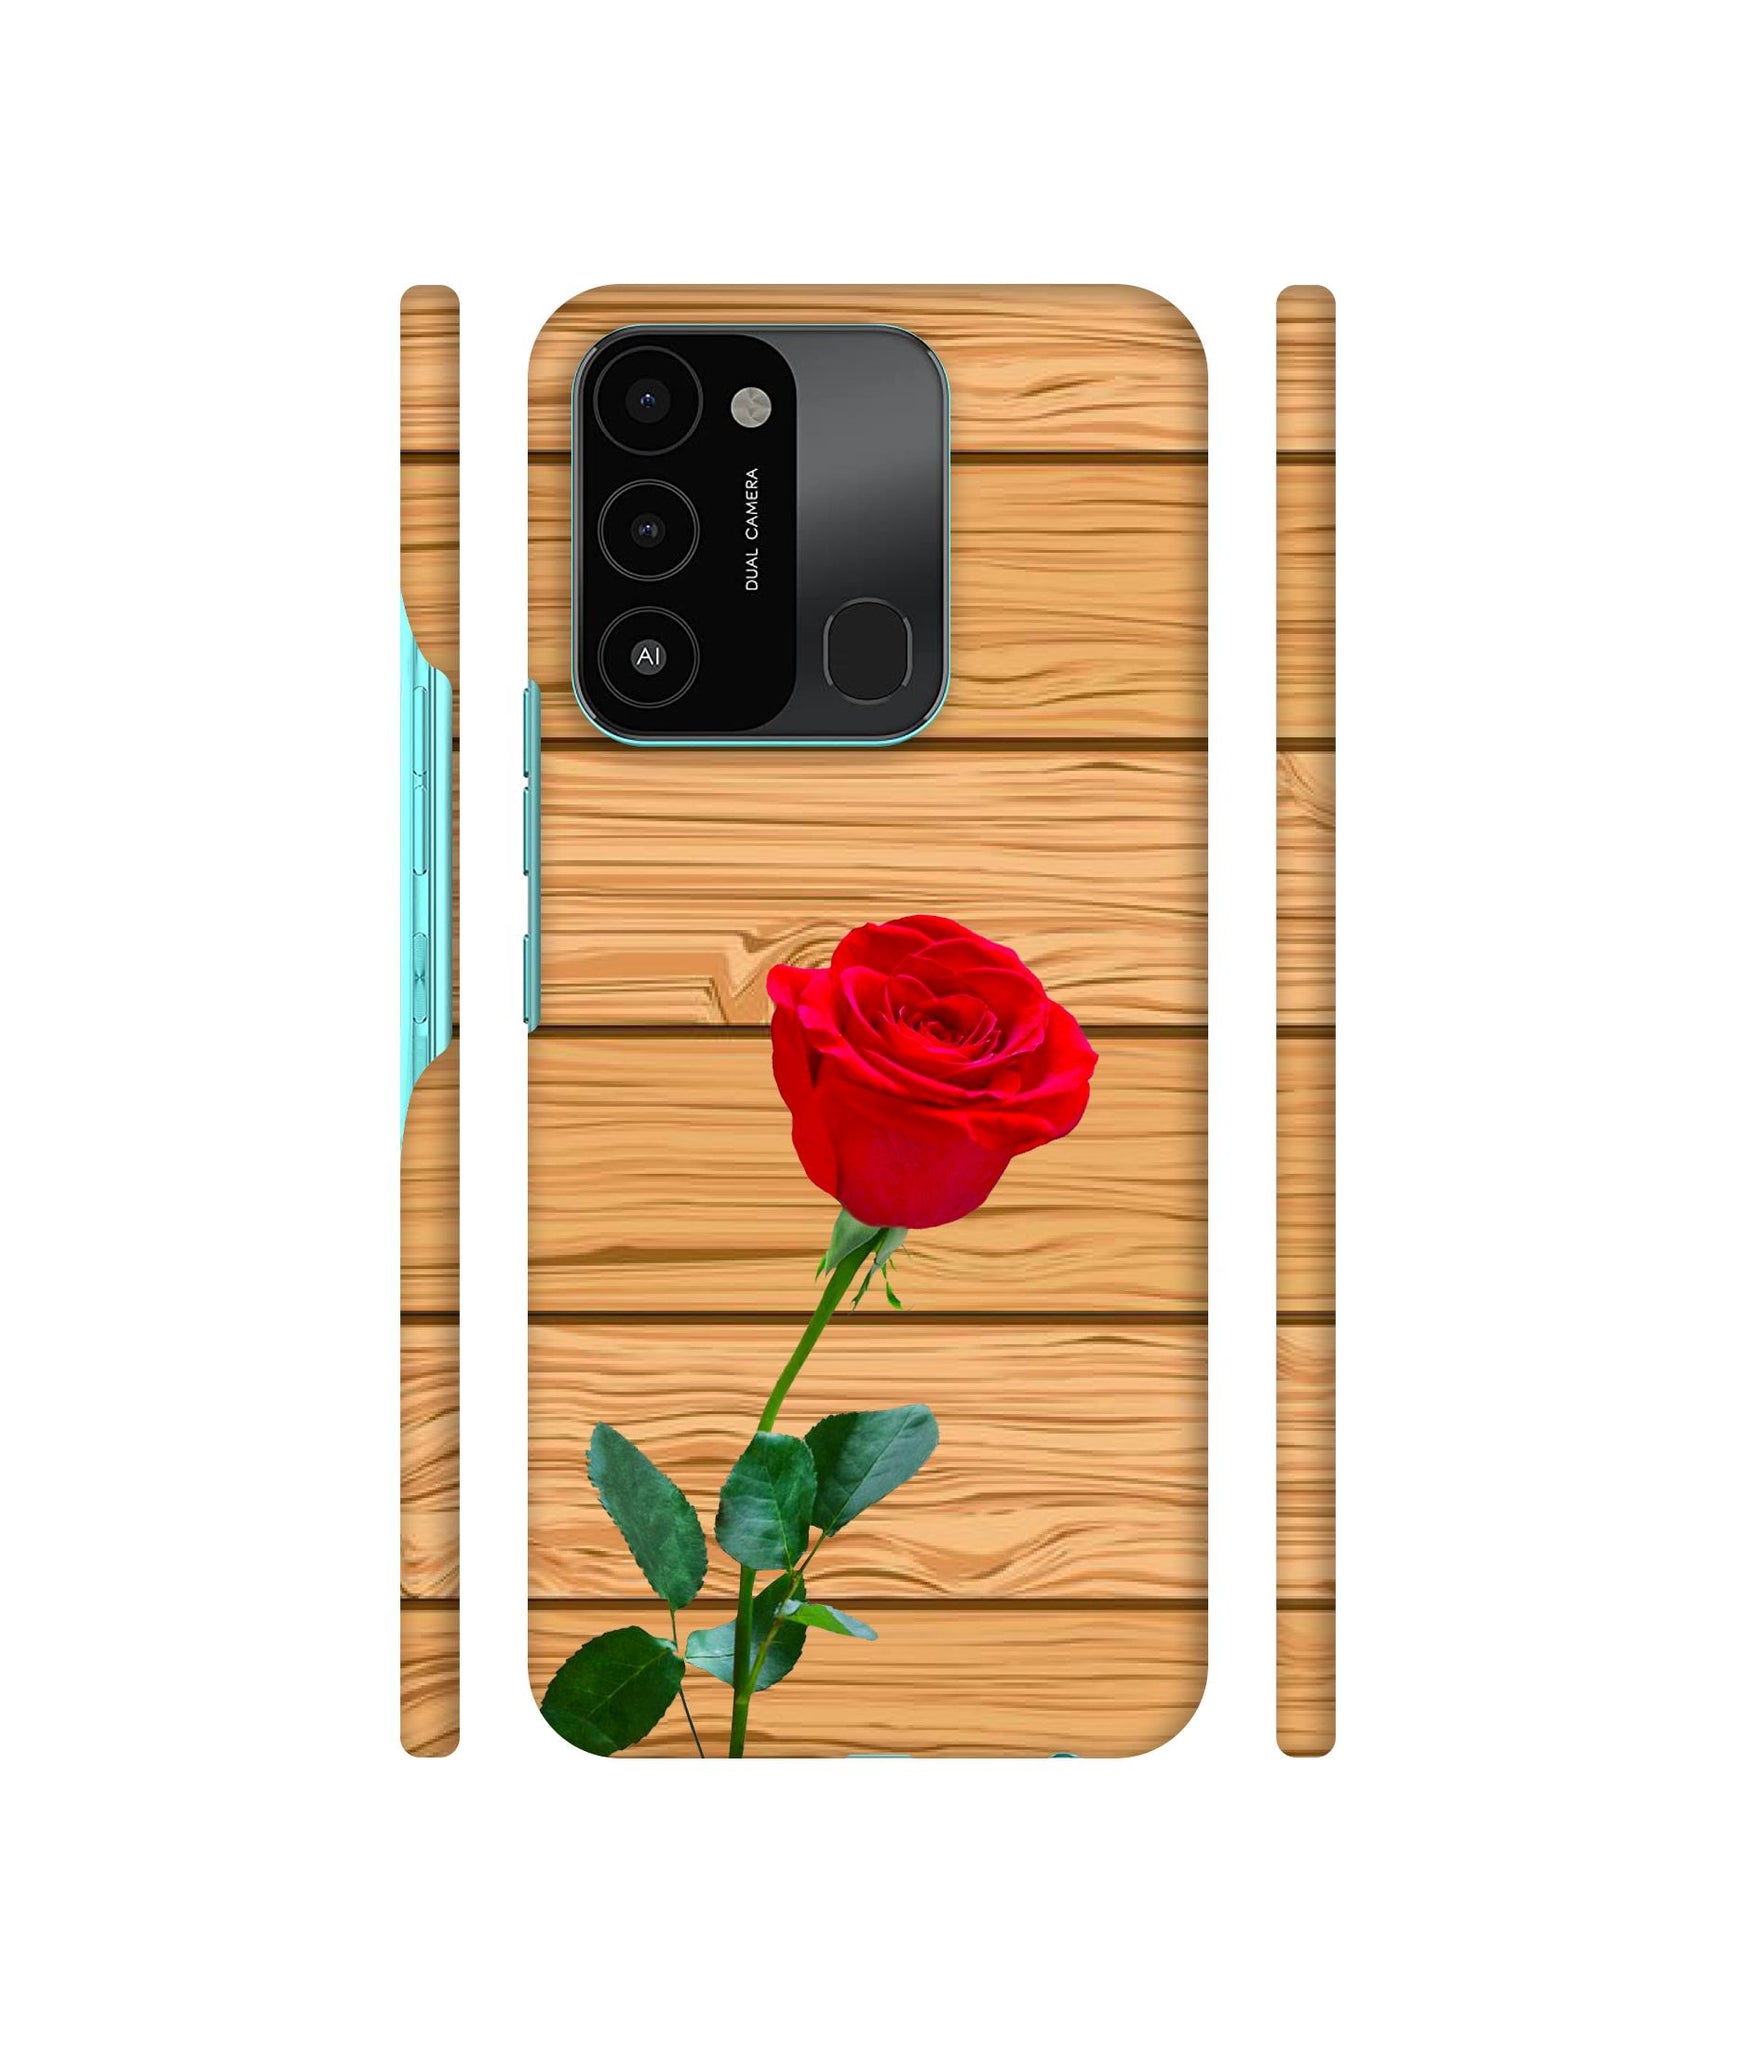 Rose With Wooden Texture Designer Hard Back Cover for Tecno Spark 8C